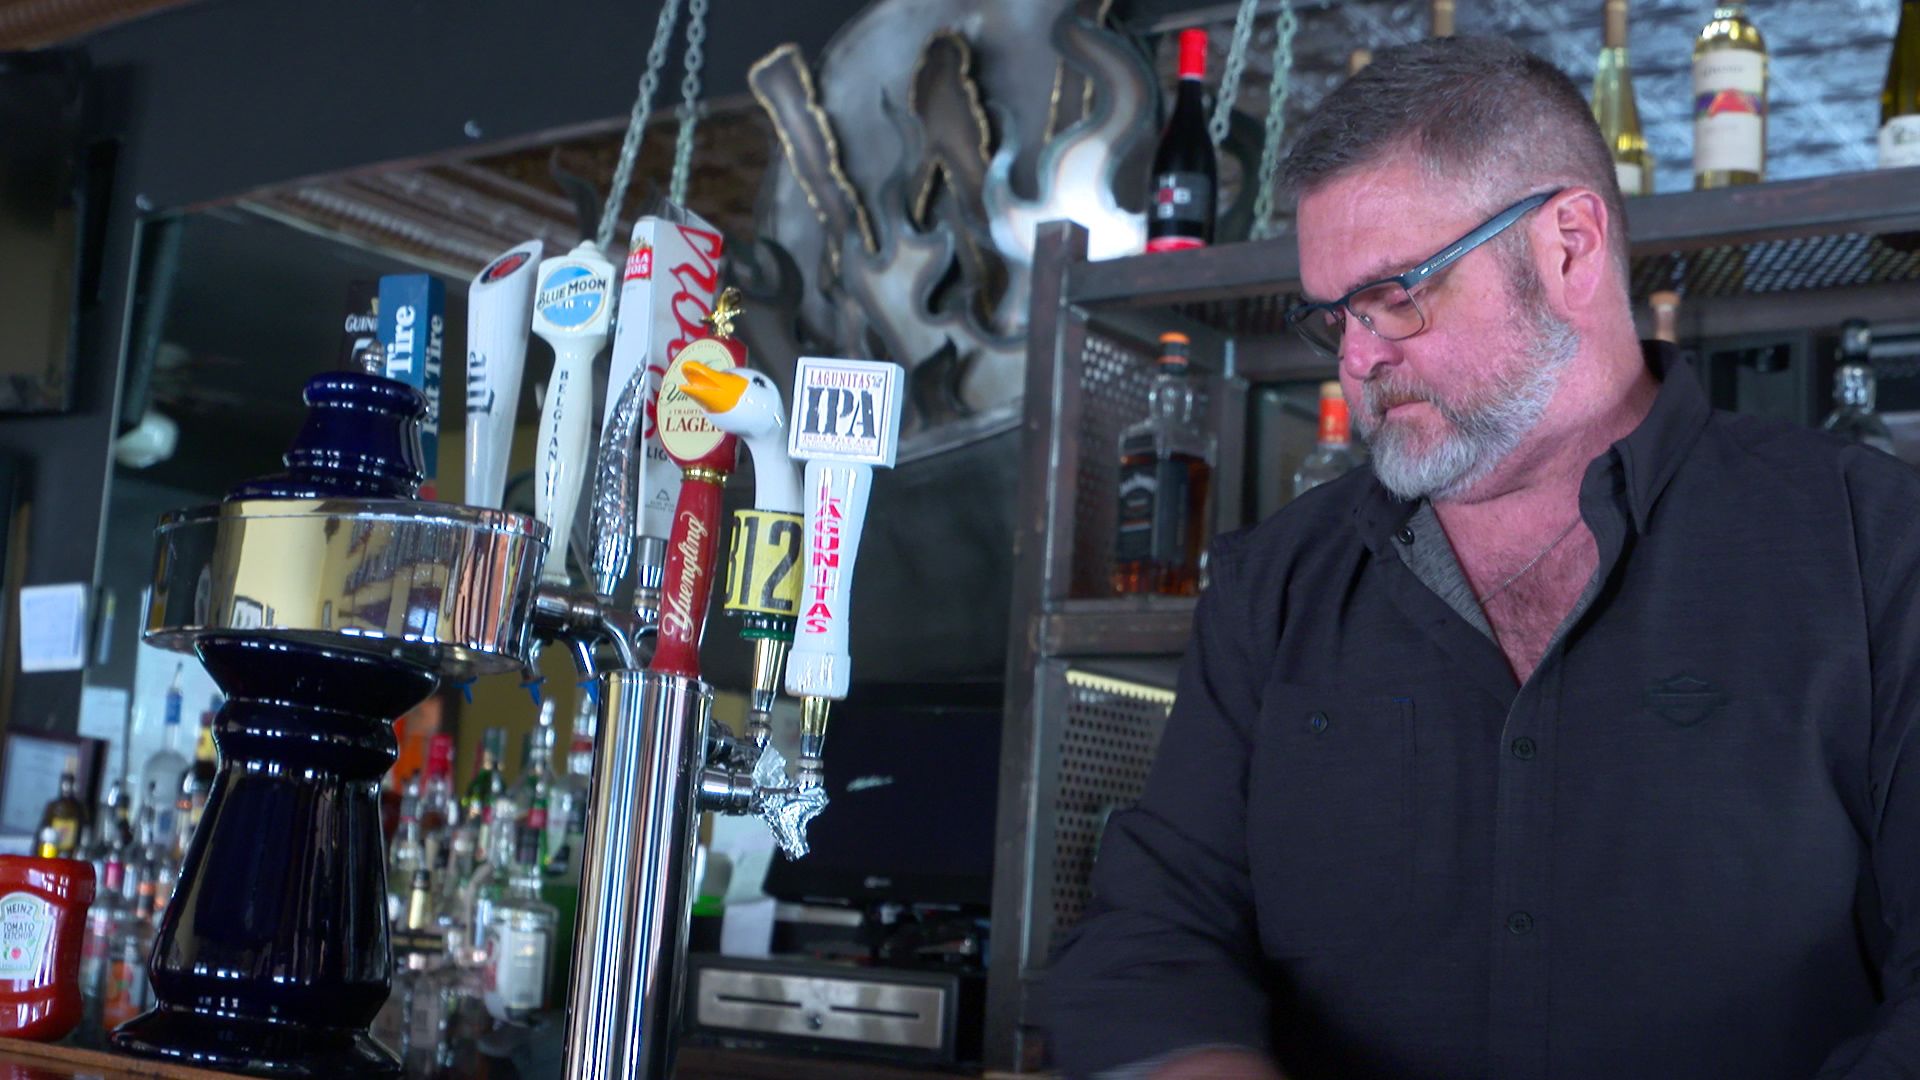 Dave Wagner cleans off the bar at his restaurant Wagner's Ribs in Porter, Indiana. Wagner says he relies heavily on tourist dollars to keep his business going. Image by Alan Mbathi / IPB News.